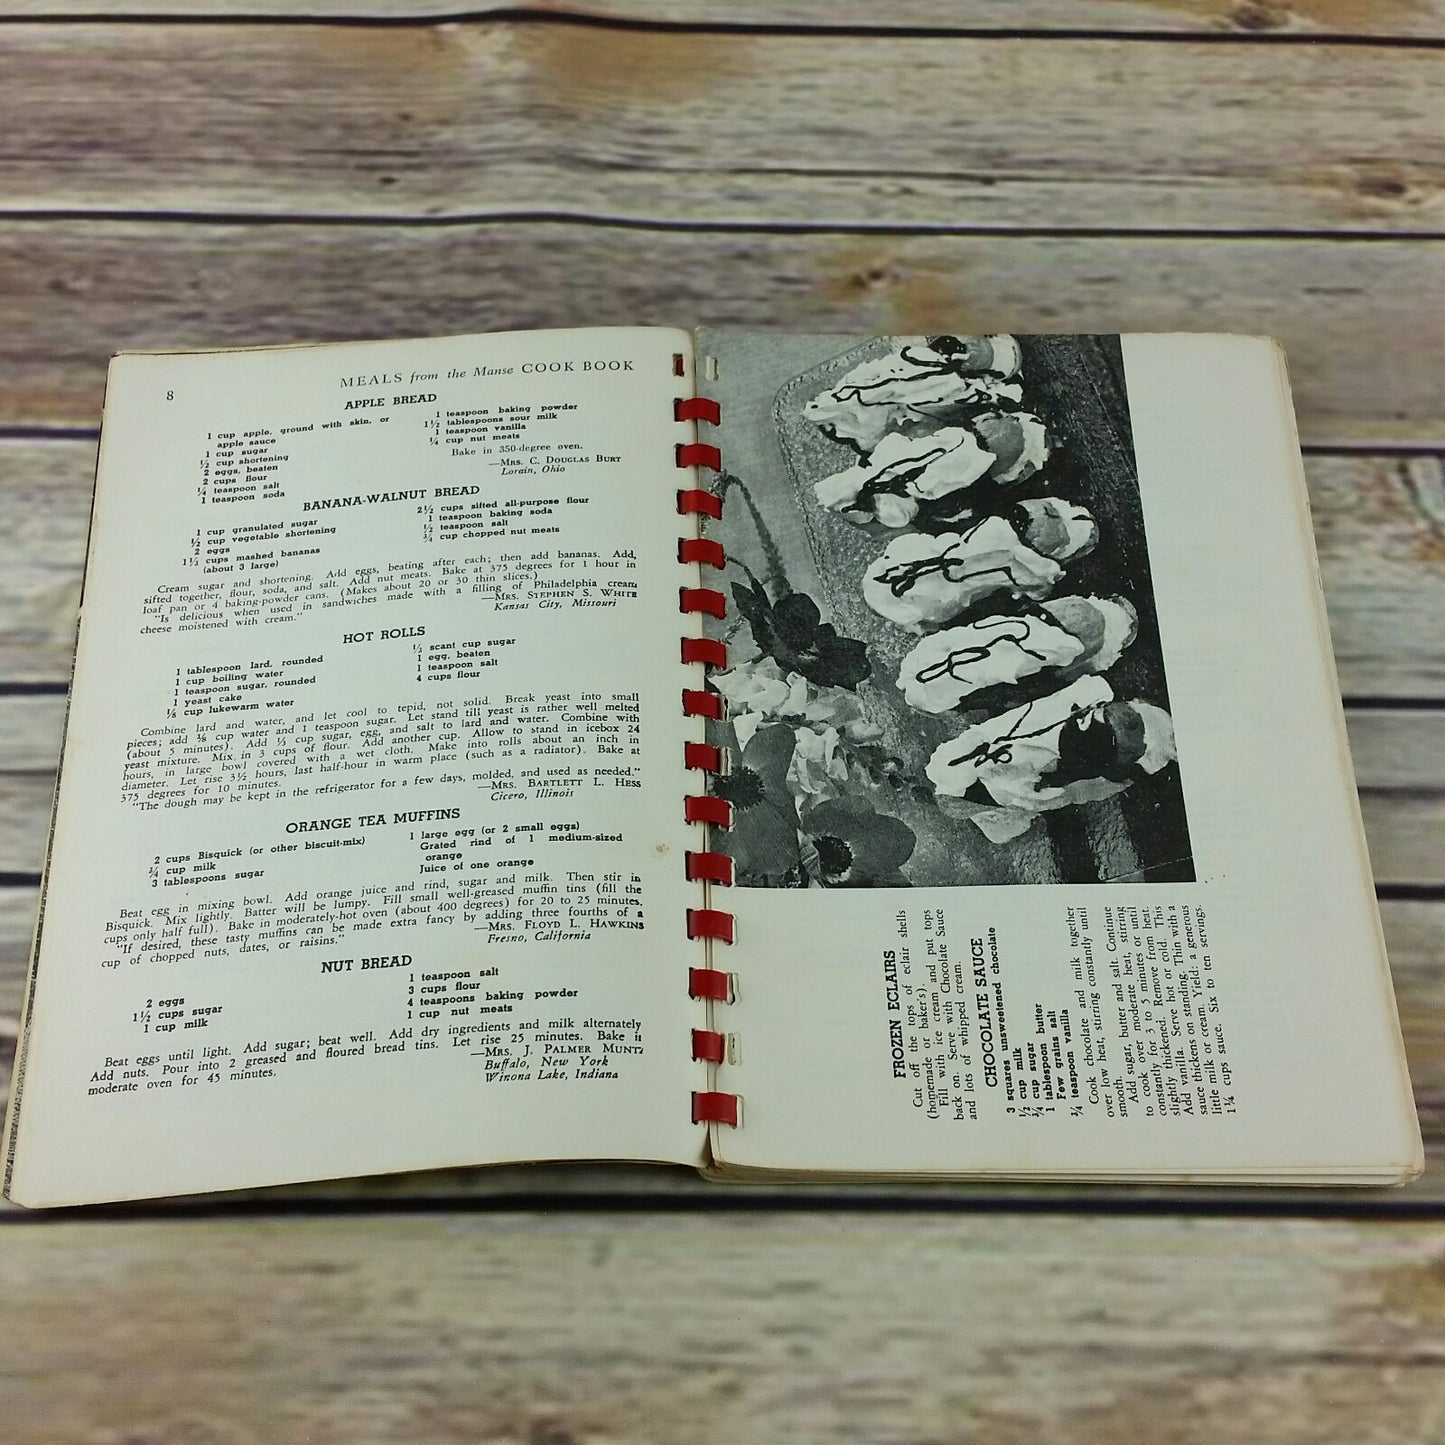 Vintage Cookbook Meals from the Manse Great Preachers Wives Recipes 1970 Spiral Bound - At Grandma's Table